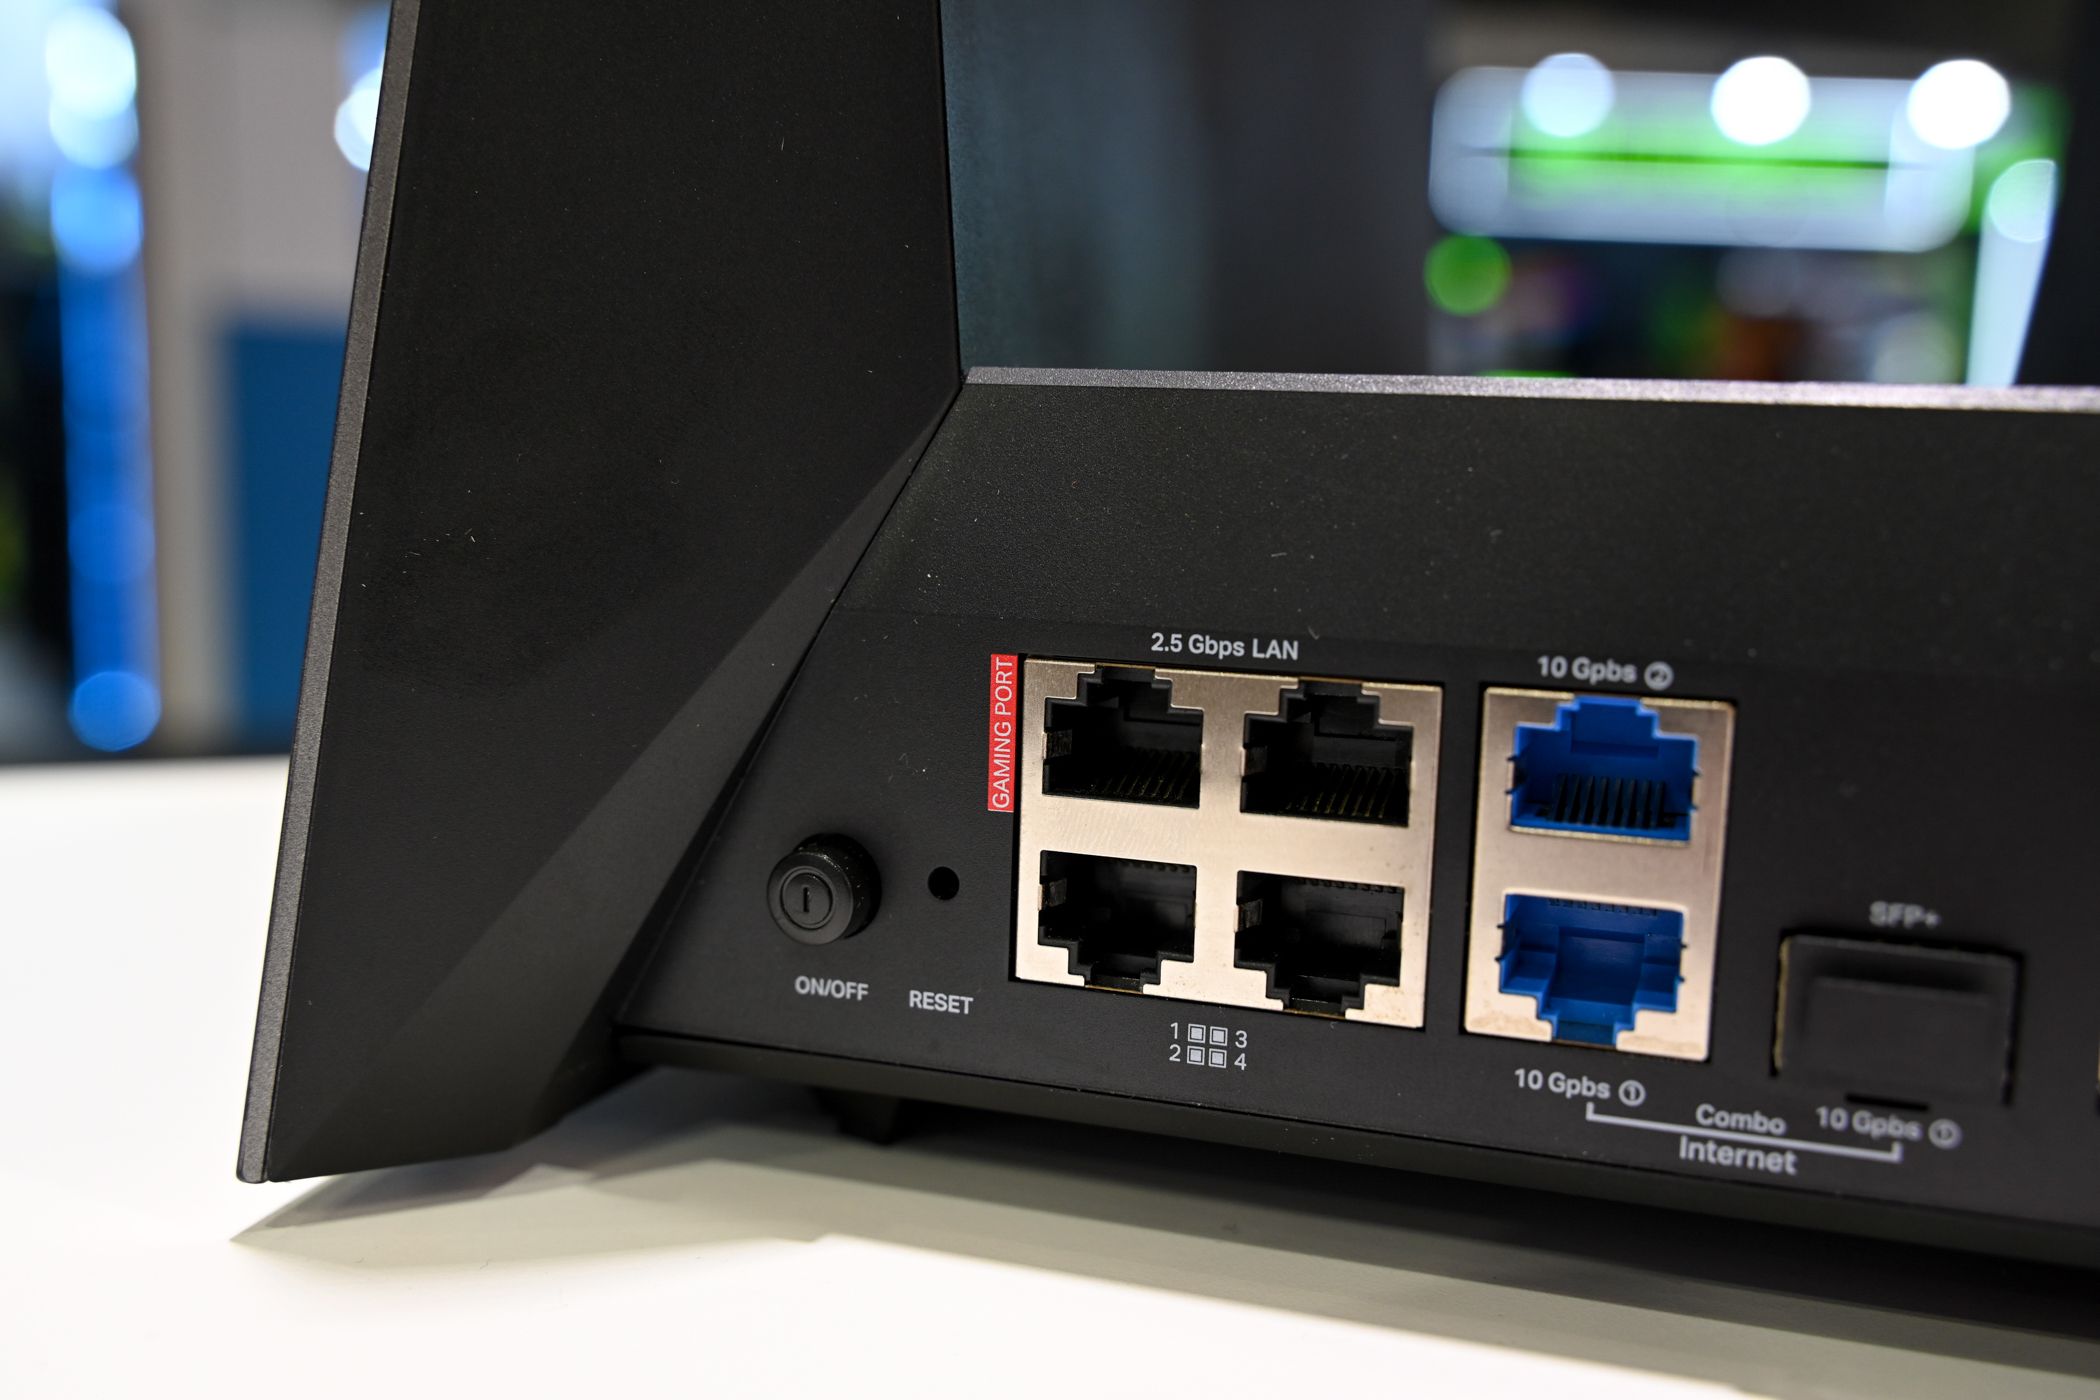 Some ports on a router. 